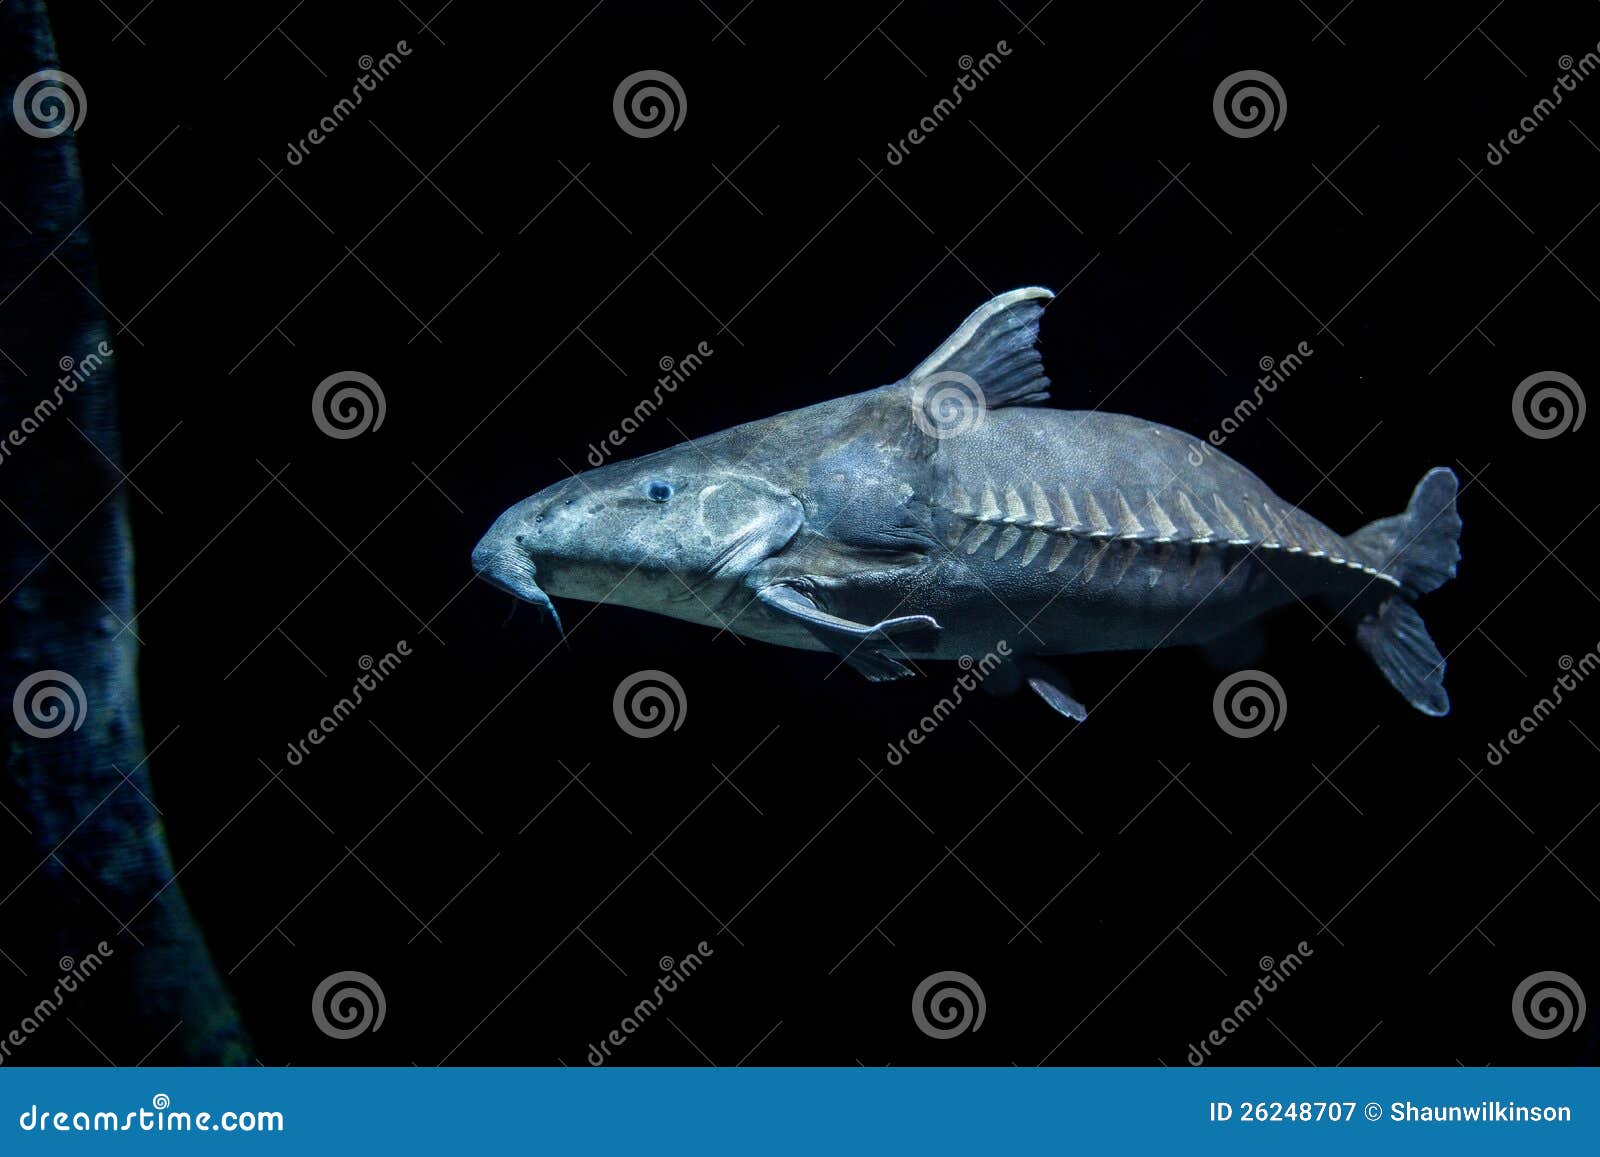 Ripsaw Catfish in Dark Water Stock Image - Image of large, south: 26248707